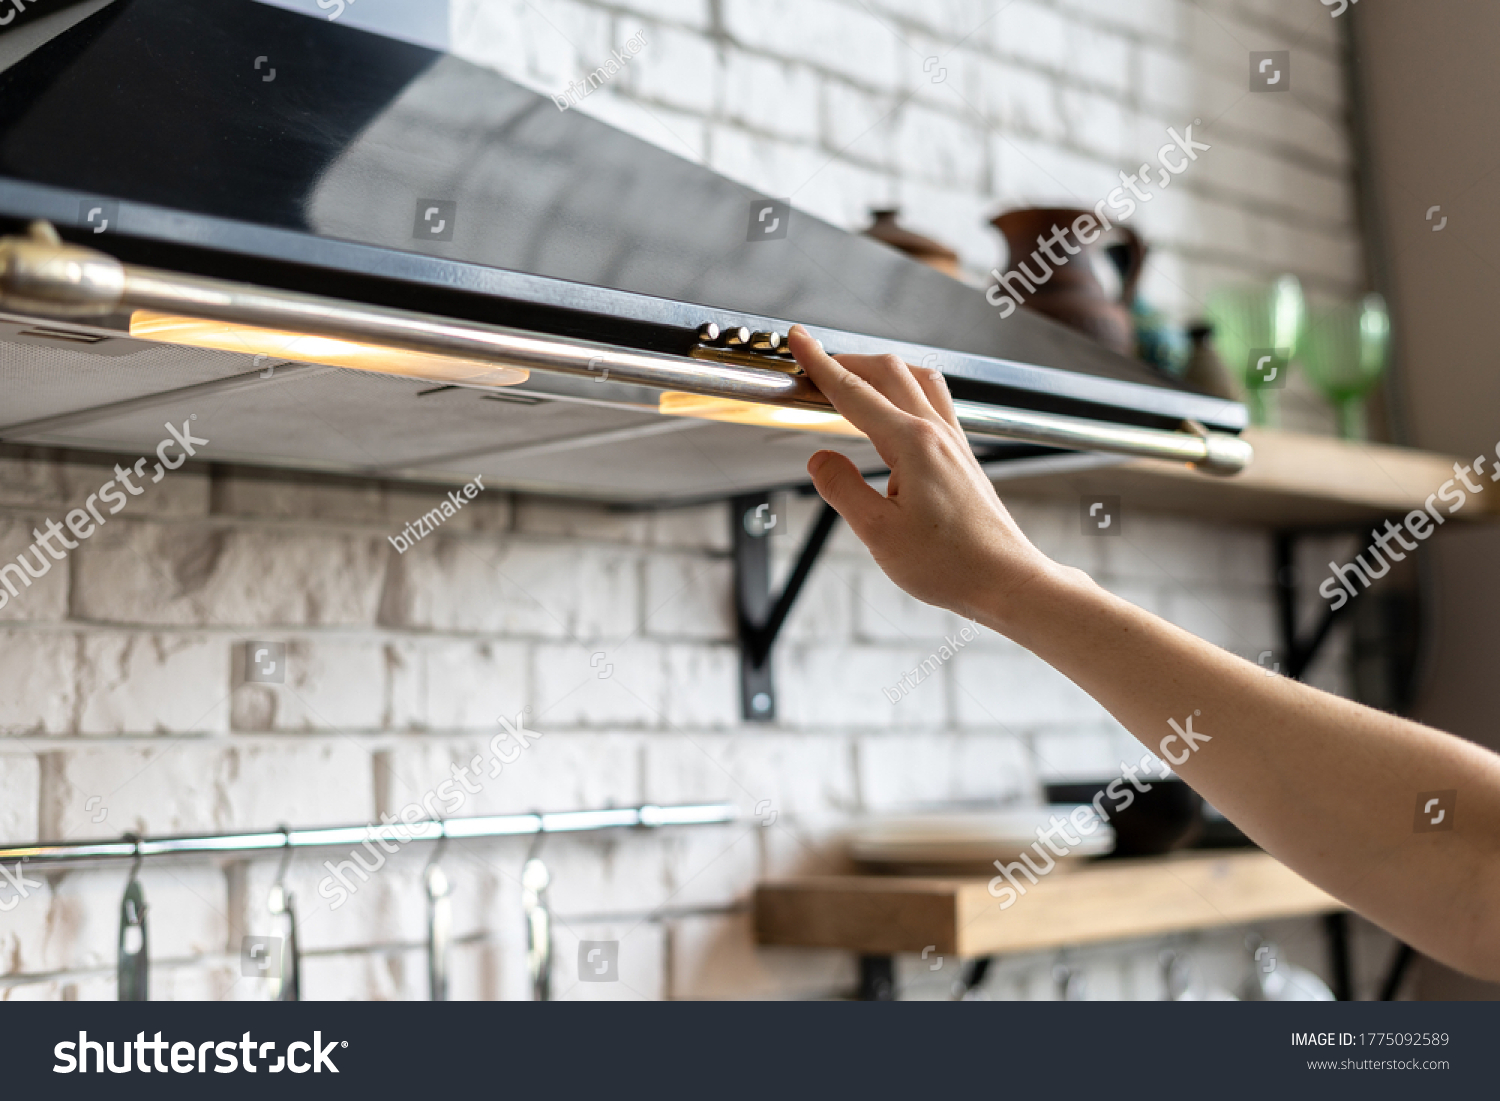 Cropped view of woman hand select mode on cooking hood, standing near kitchen appliance in contemporary interior with brick wall and decor on shelves at blurred background #1775092589